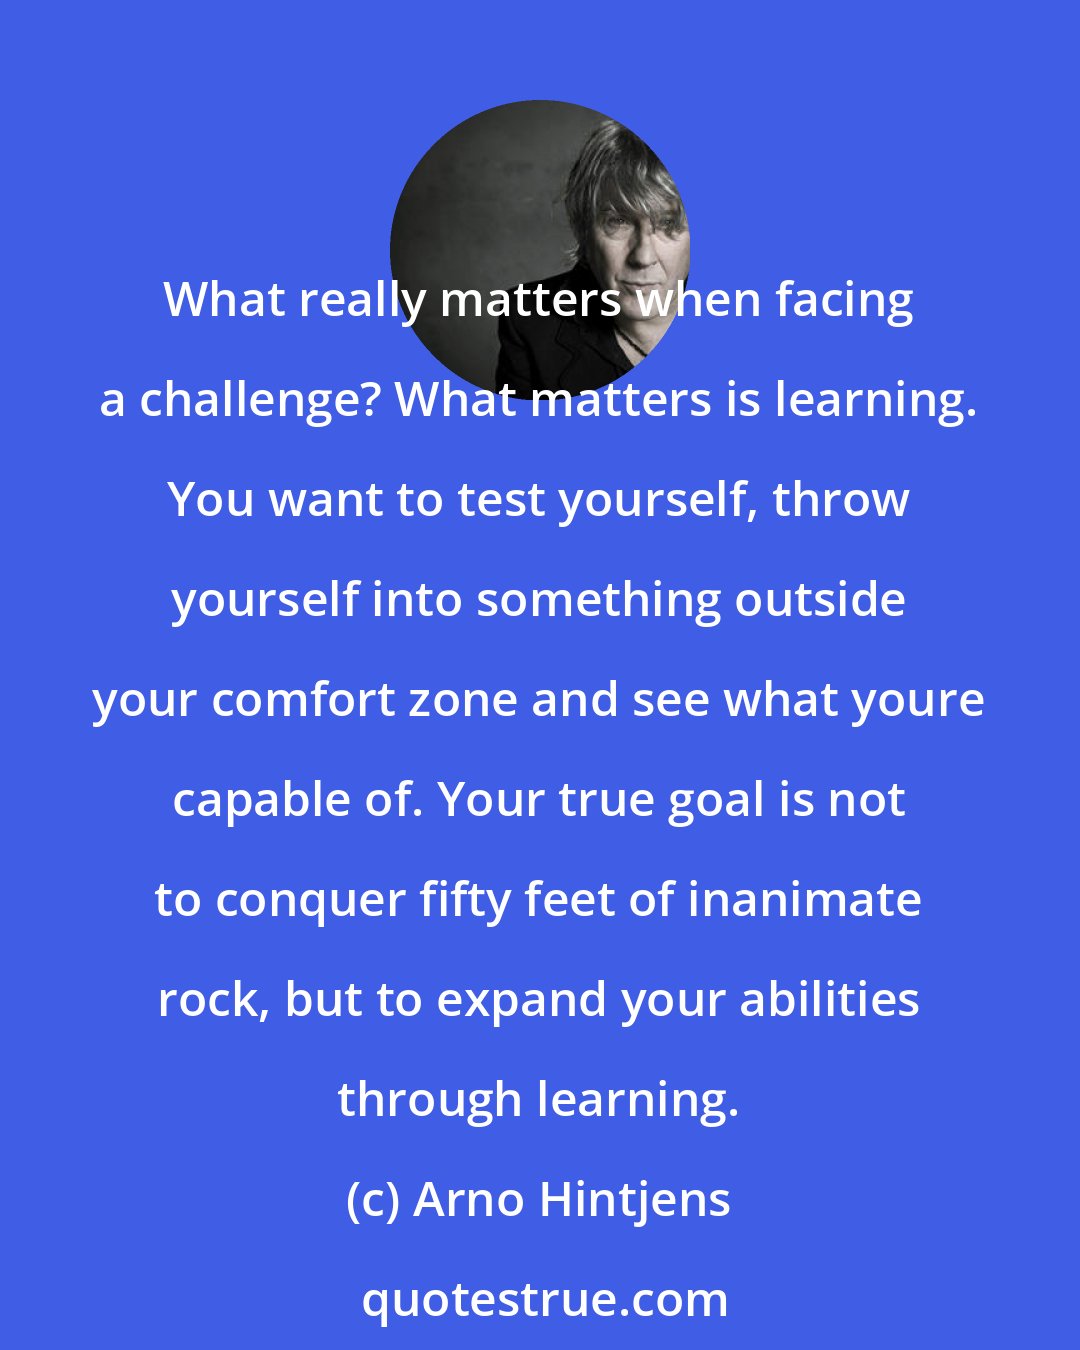 Arno Hintjens: What really matters when facing a challenge? What matters is learning. You want to test yourself, throw yourself into something outside your comfort zone and see what youre capable of. Your true goal is not to conquer fifty feet of inanimate rock, but to expand your abilities through learning.